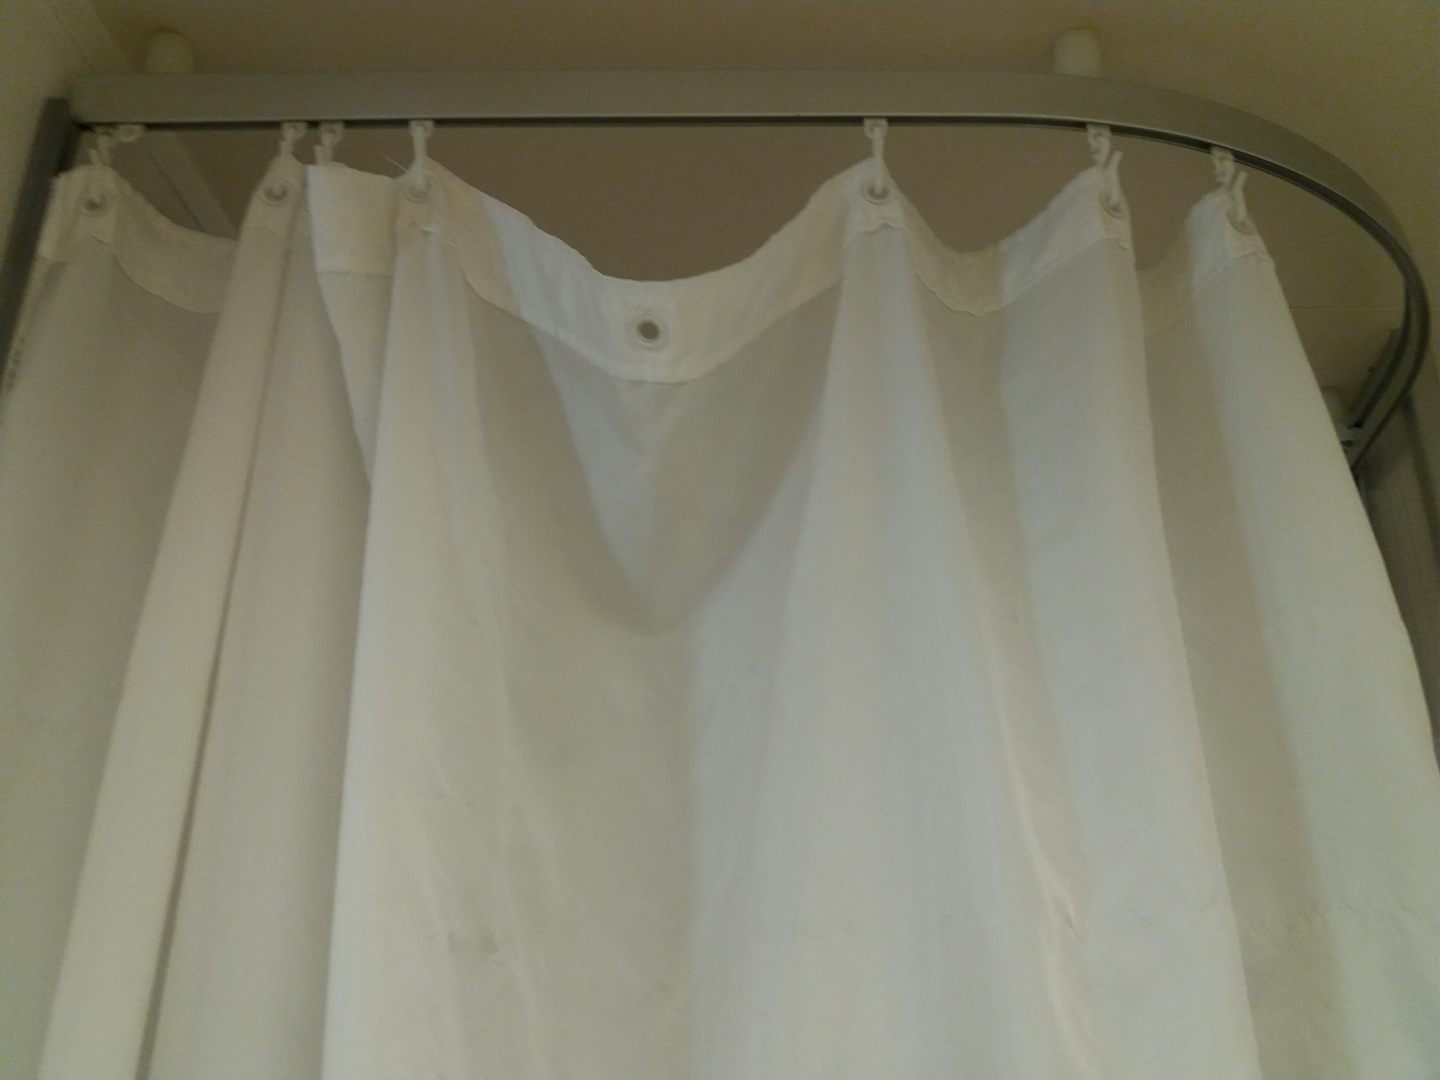 Shower curtain. Who uses curtains in the shower in the 21st century? Much less in this shape....